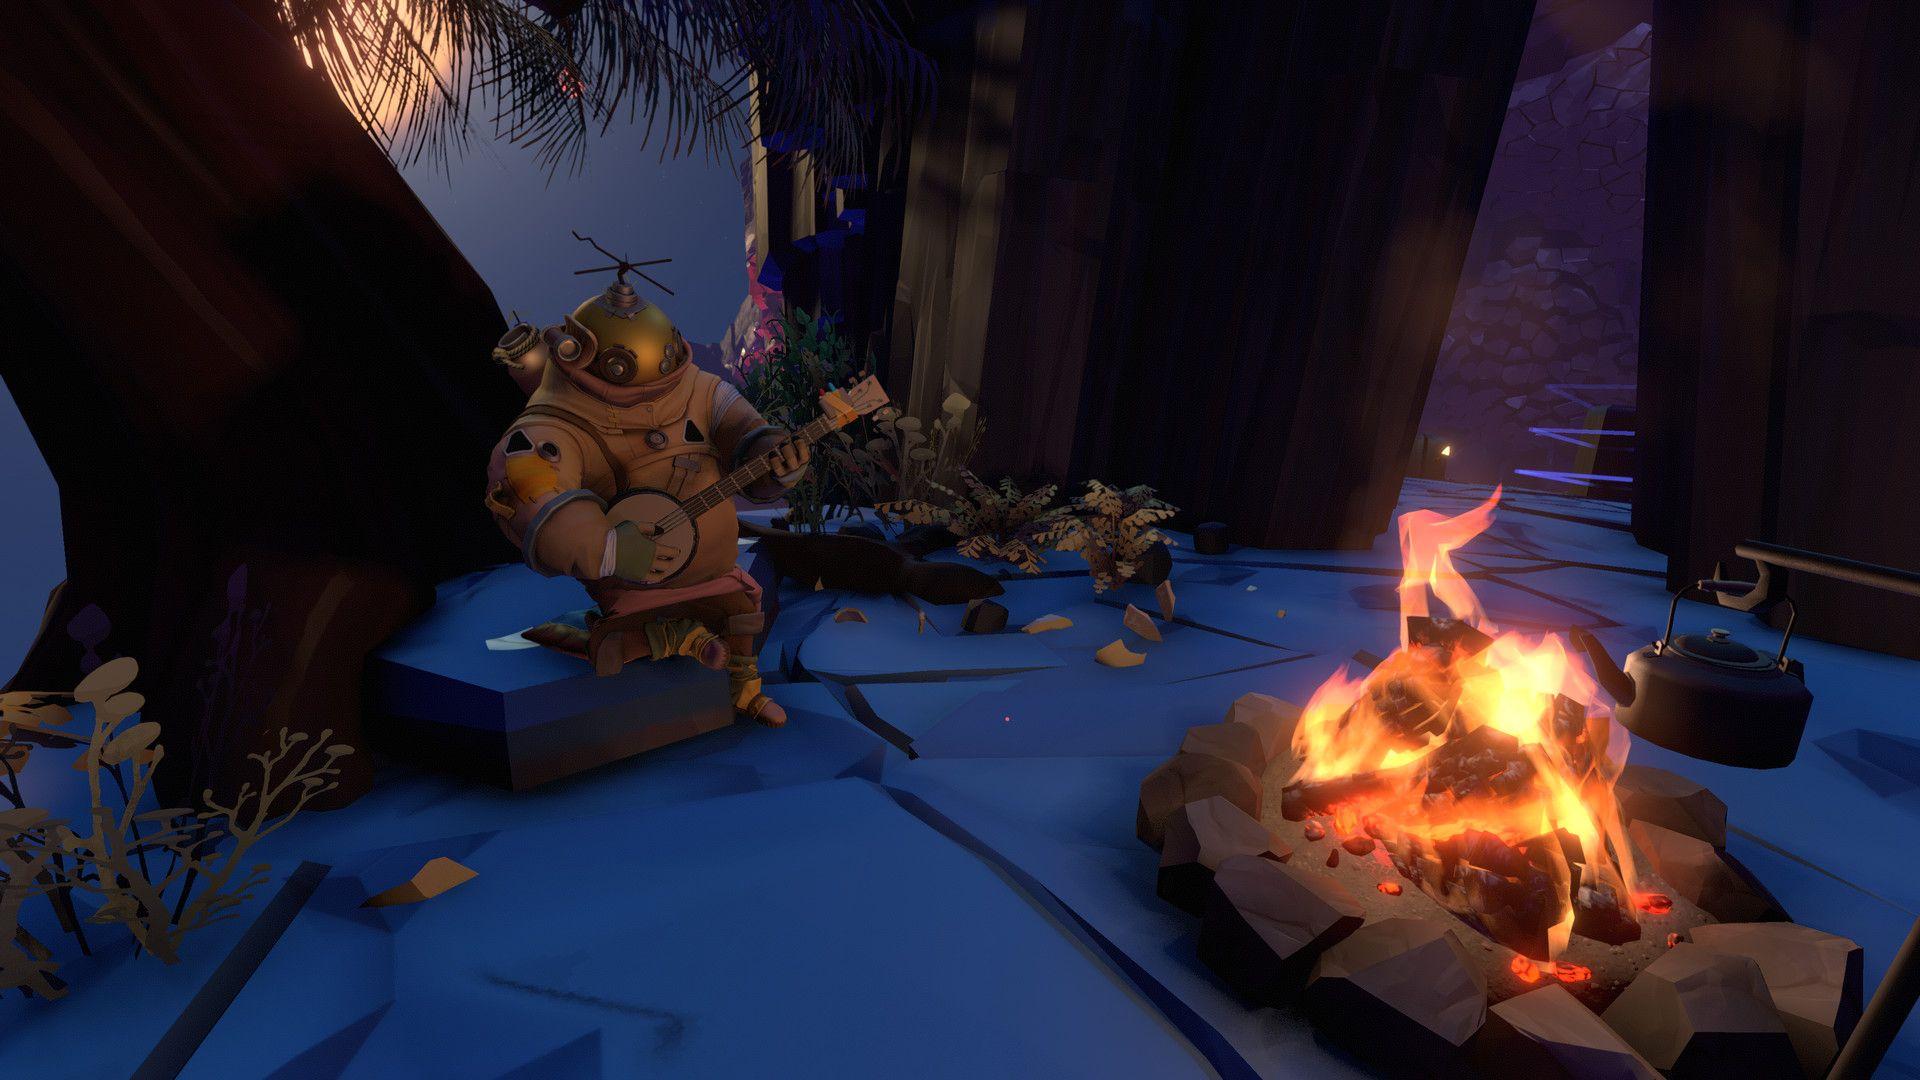 Outer Wilds, the game of cosmic exploration and campfires, is